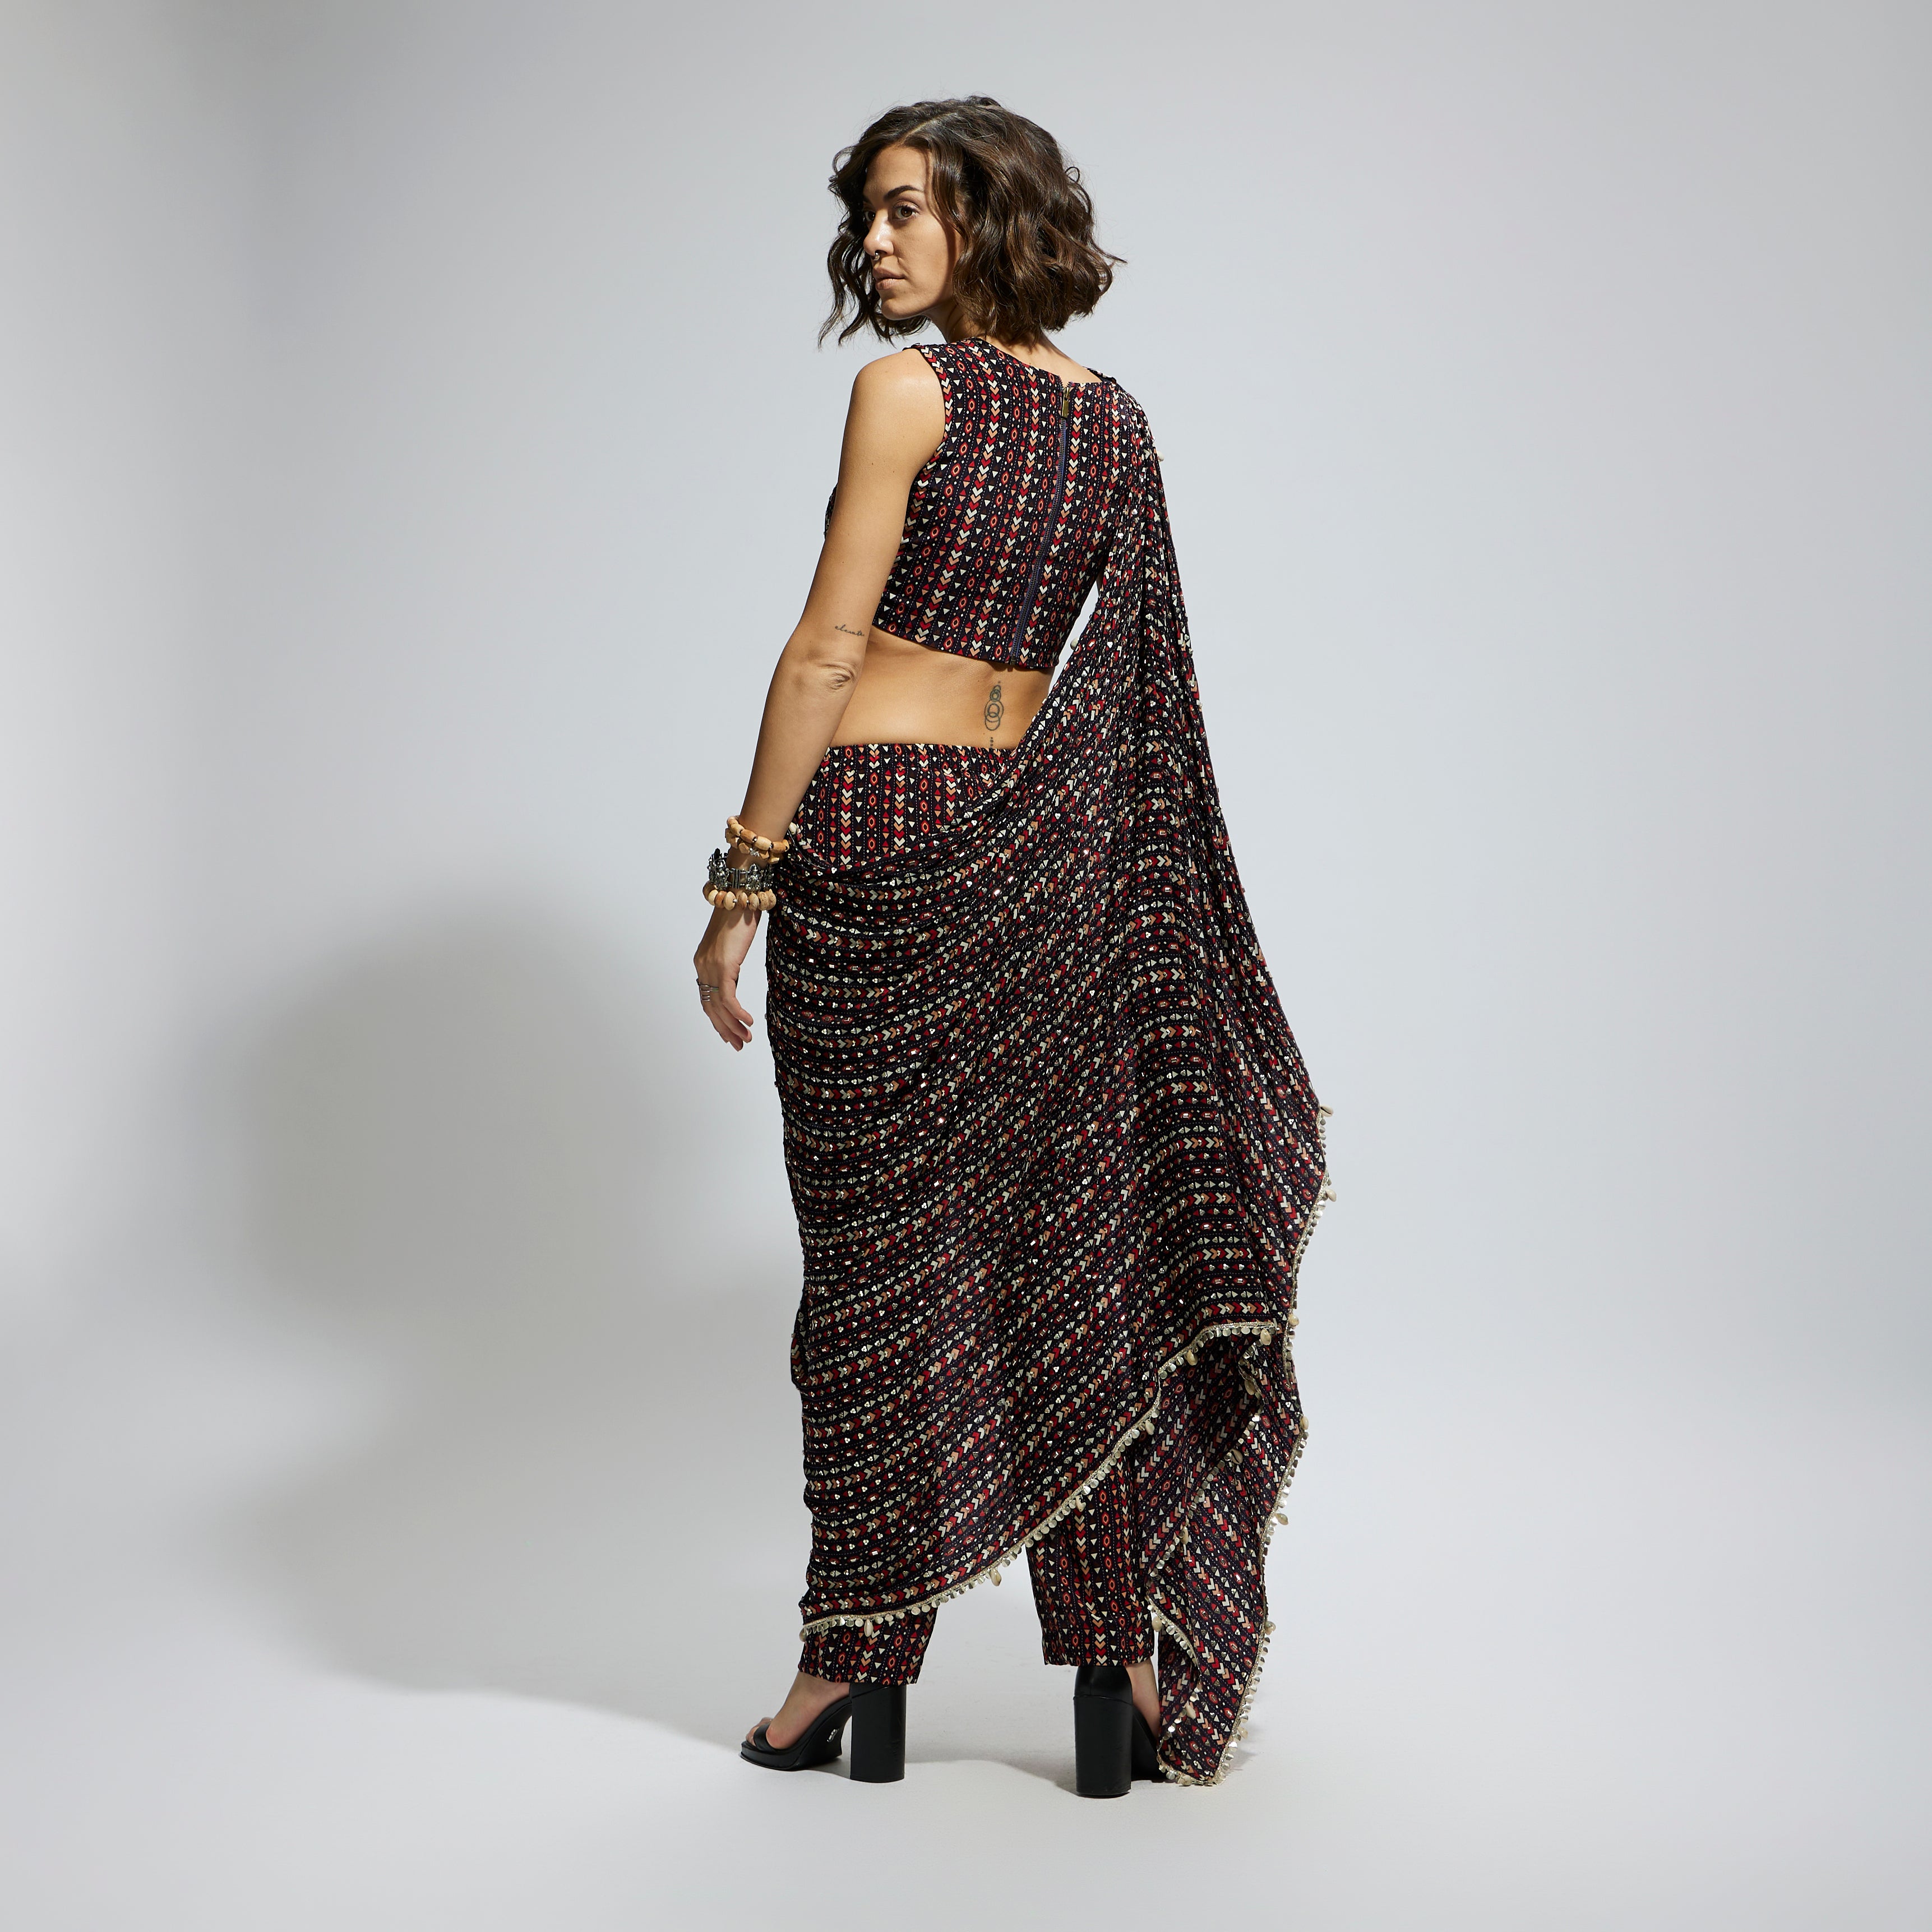 BLUE BOHO PRINT EMBELLISHED CROPTOP ATTACHED DRAPE WITH PANTS